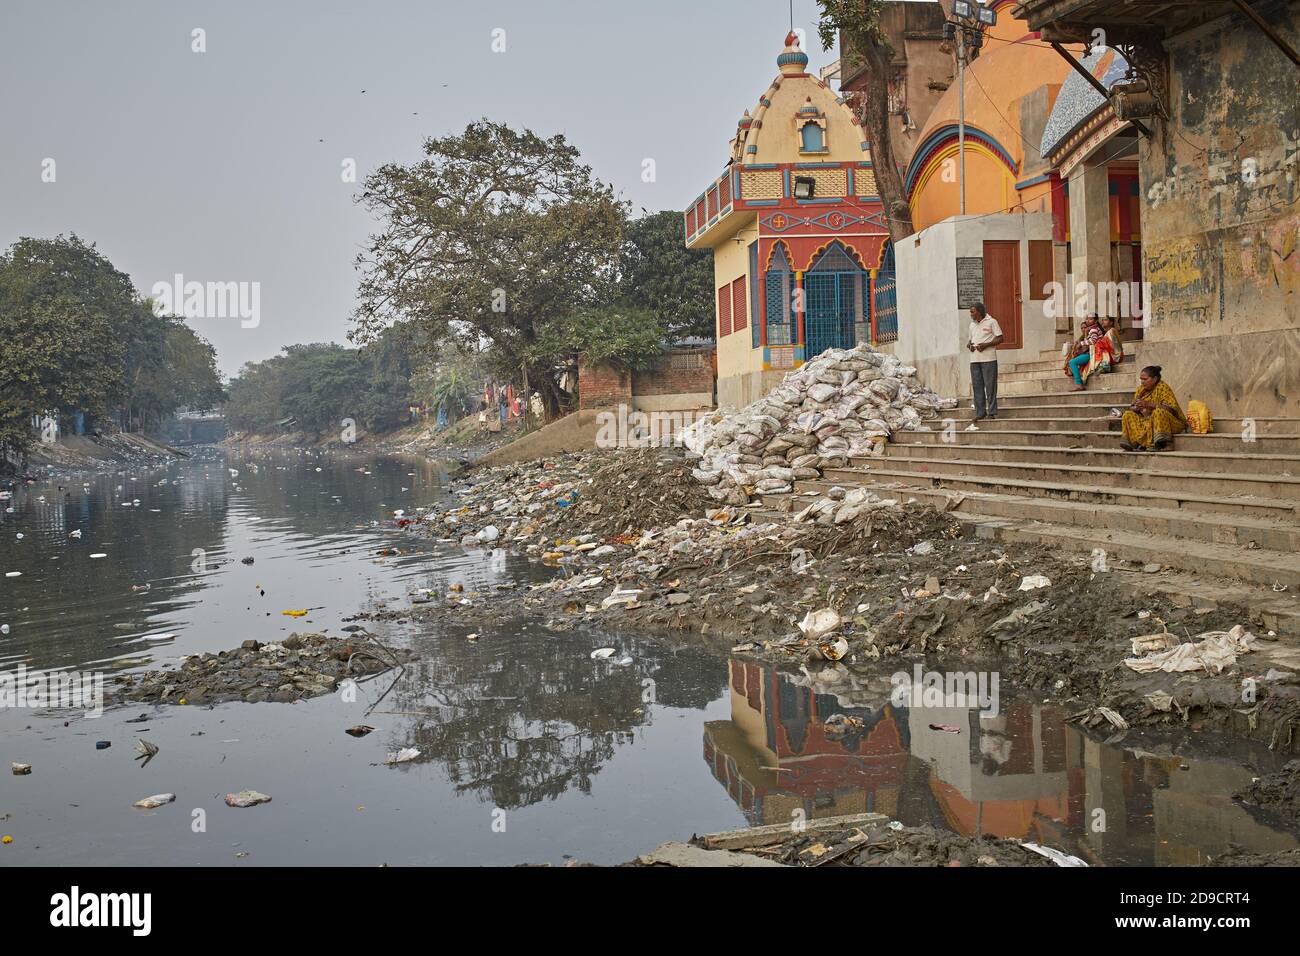 Kolkata, India, January 2008. People in a ghat of a heavily polluted canal in a Kalighat slum. Stock Photo